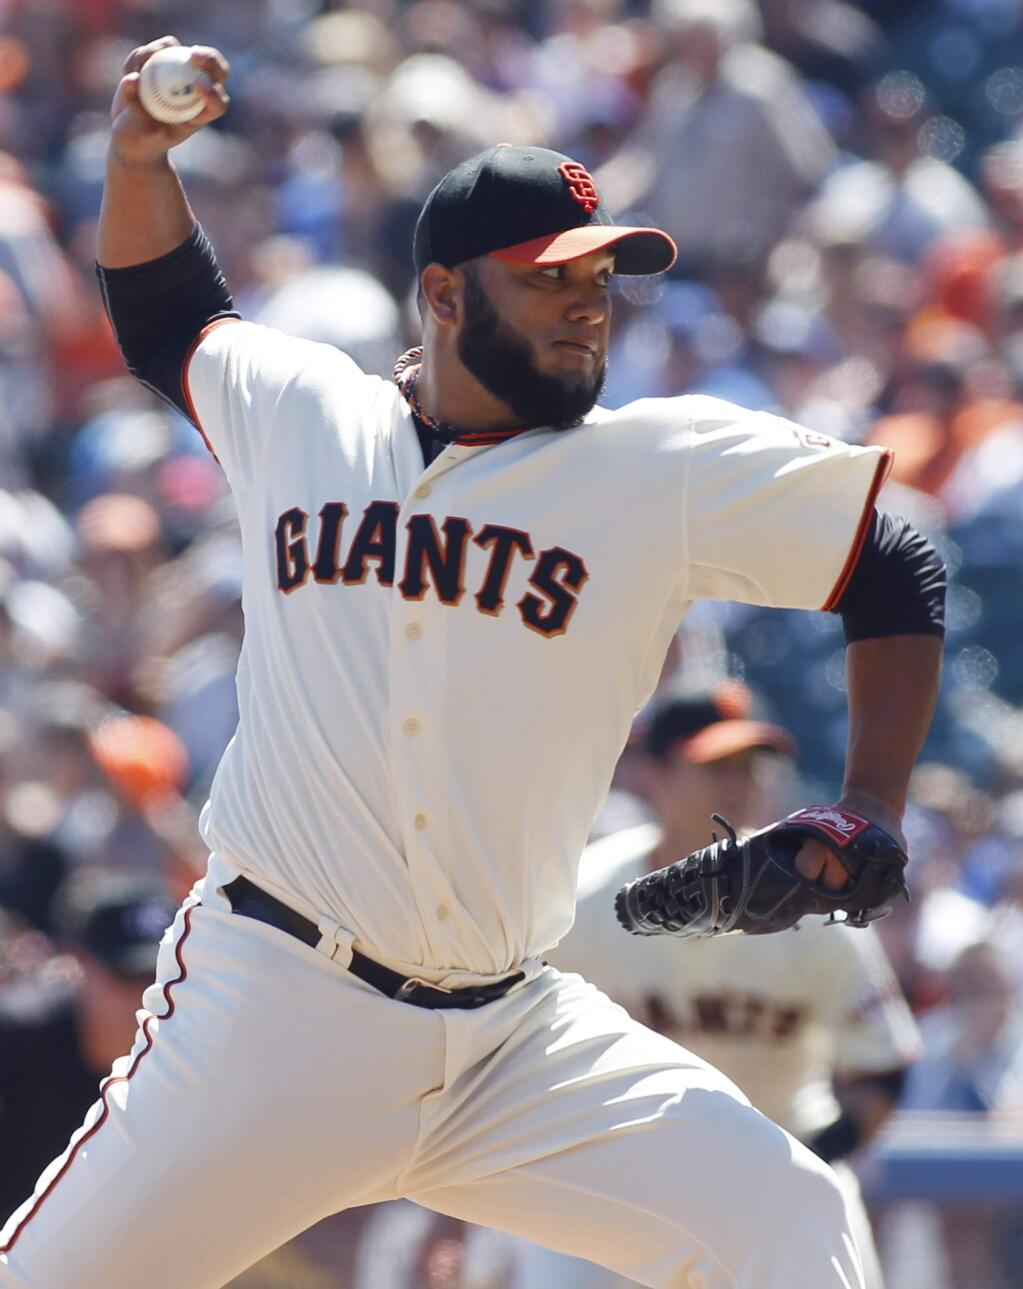 San Francisco Giants pitcher Yusmeiro Petit throws to the Los Angeles Dodgers during the first inning of a baseball game, Sunday, Sept. 14, 2014, in San Francisco. (AP Photo/George Nikitin)